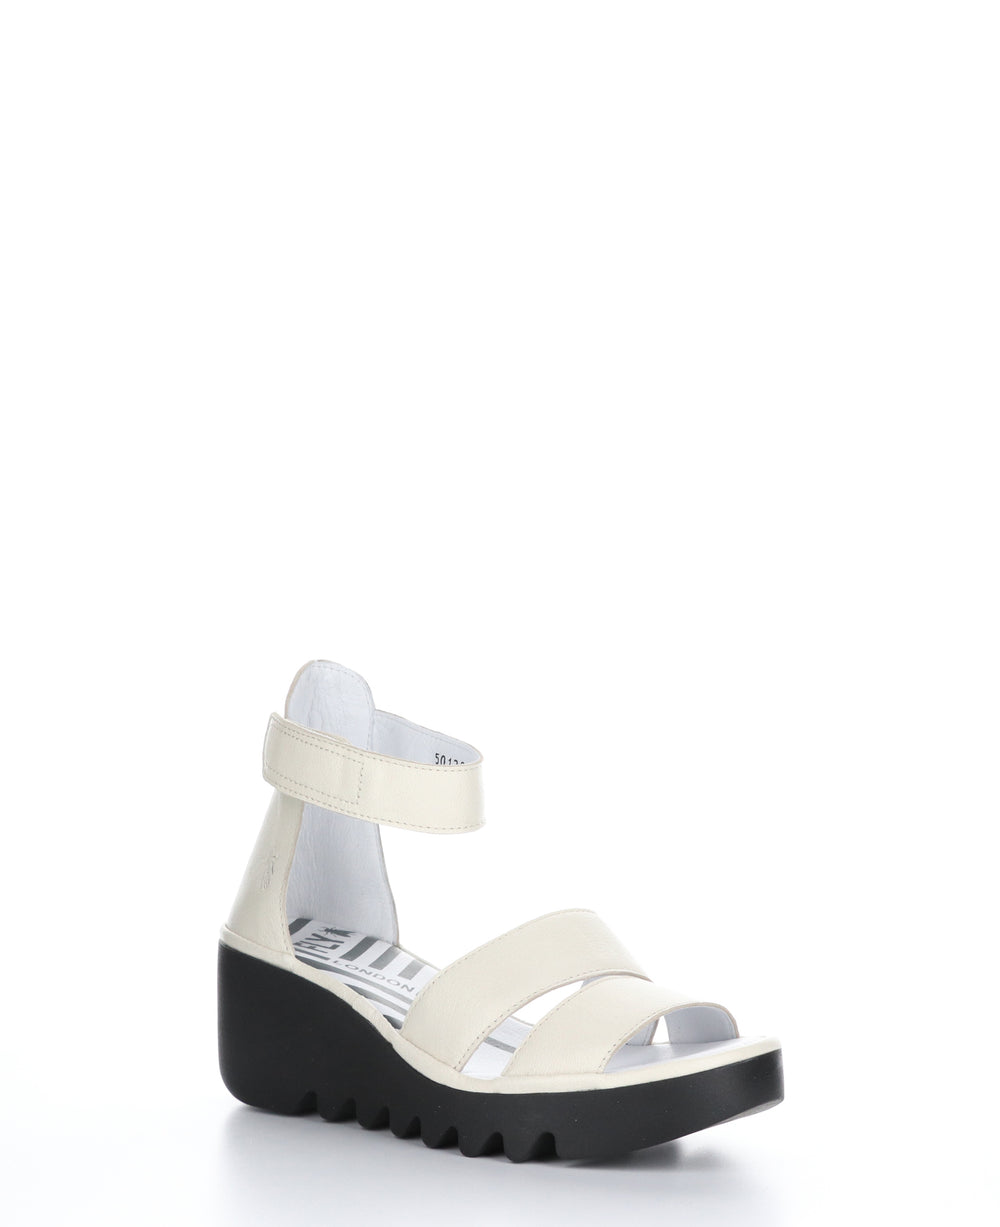 BONO290FLY Mousse Offwhite Strappy Sandals